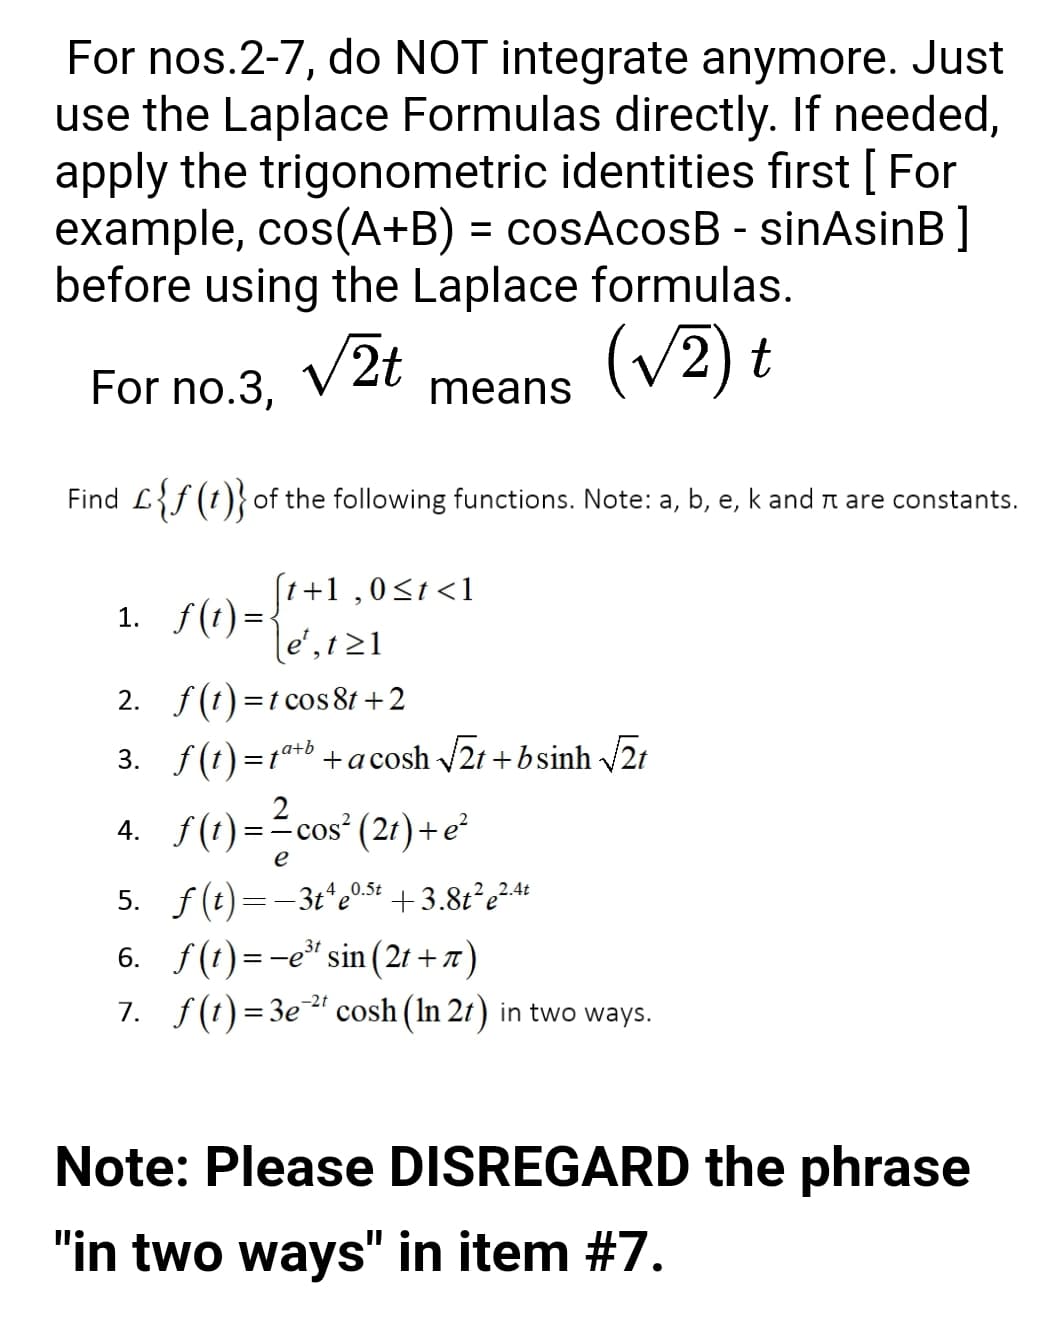 For nos.2-7, do NOT integrate anymore. Just
use the Laplace Formulas directly. If needed,
apply the trigonometric identities fırst [ For
example, cos(A+B) = cosAcosB - sinAsinB ]
before using the Laplace formulas.
V2t
(v2) t
For no.3,
means
Find L{f (t)}of the following functions. Note: a, b, e, k and n are constants.
(t+1 ,0<t <1
1. f(t) = {
le', 1 21
2. f(t) =t cos 81 +2
3. f(1) =1t+b +a cosh 21 +bsinh /21
4. S(1) =?cos" (21)+e*
5. f(t)=-3t*e0.5+ +3.8t²e²4+
6. f(t) =-e" sin (21 + 7)
7. f(t)=3e" cosh (In 21) in two ways.
-2t
Note: Please DISREGARD the phrase
"in two ways" in item #7.
